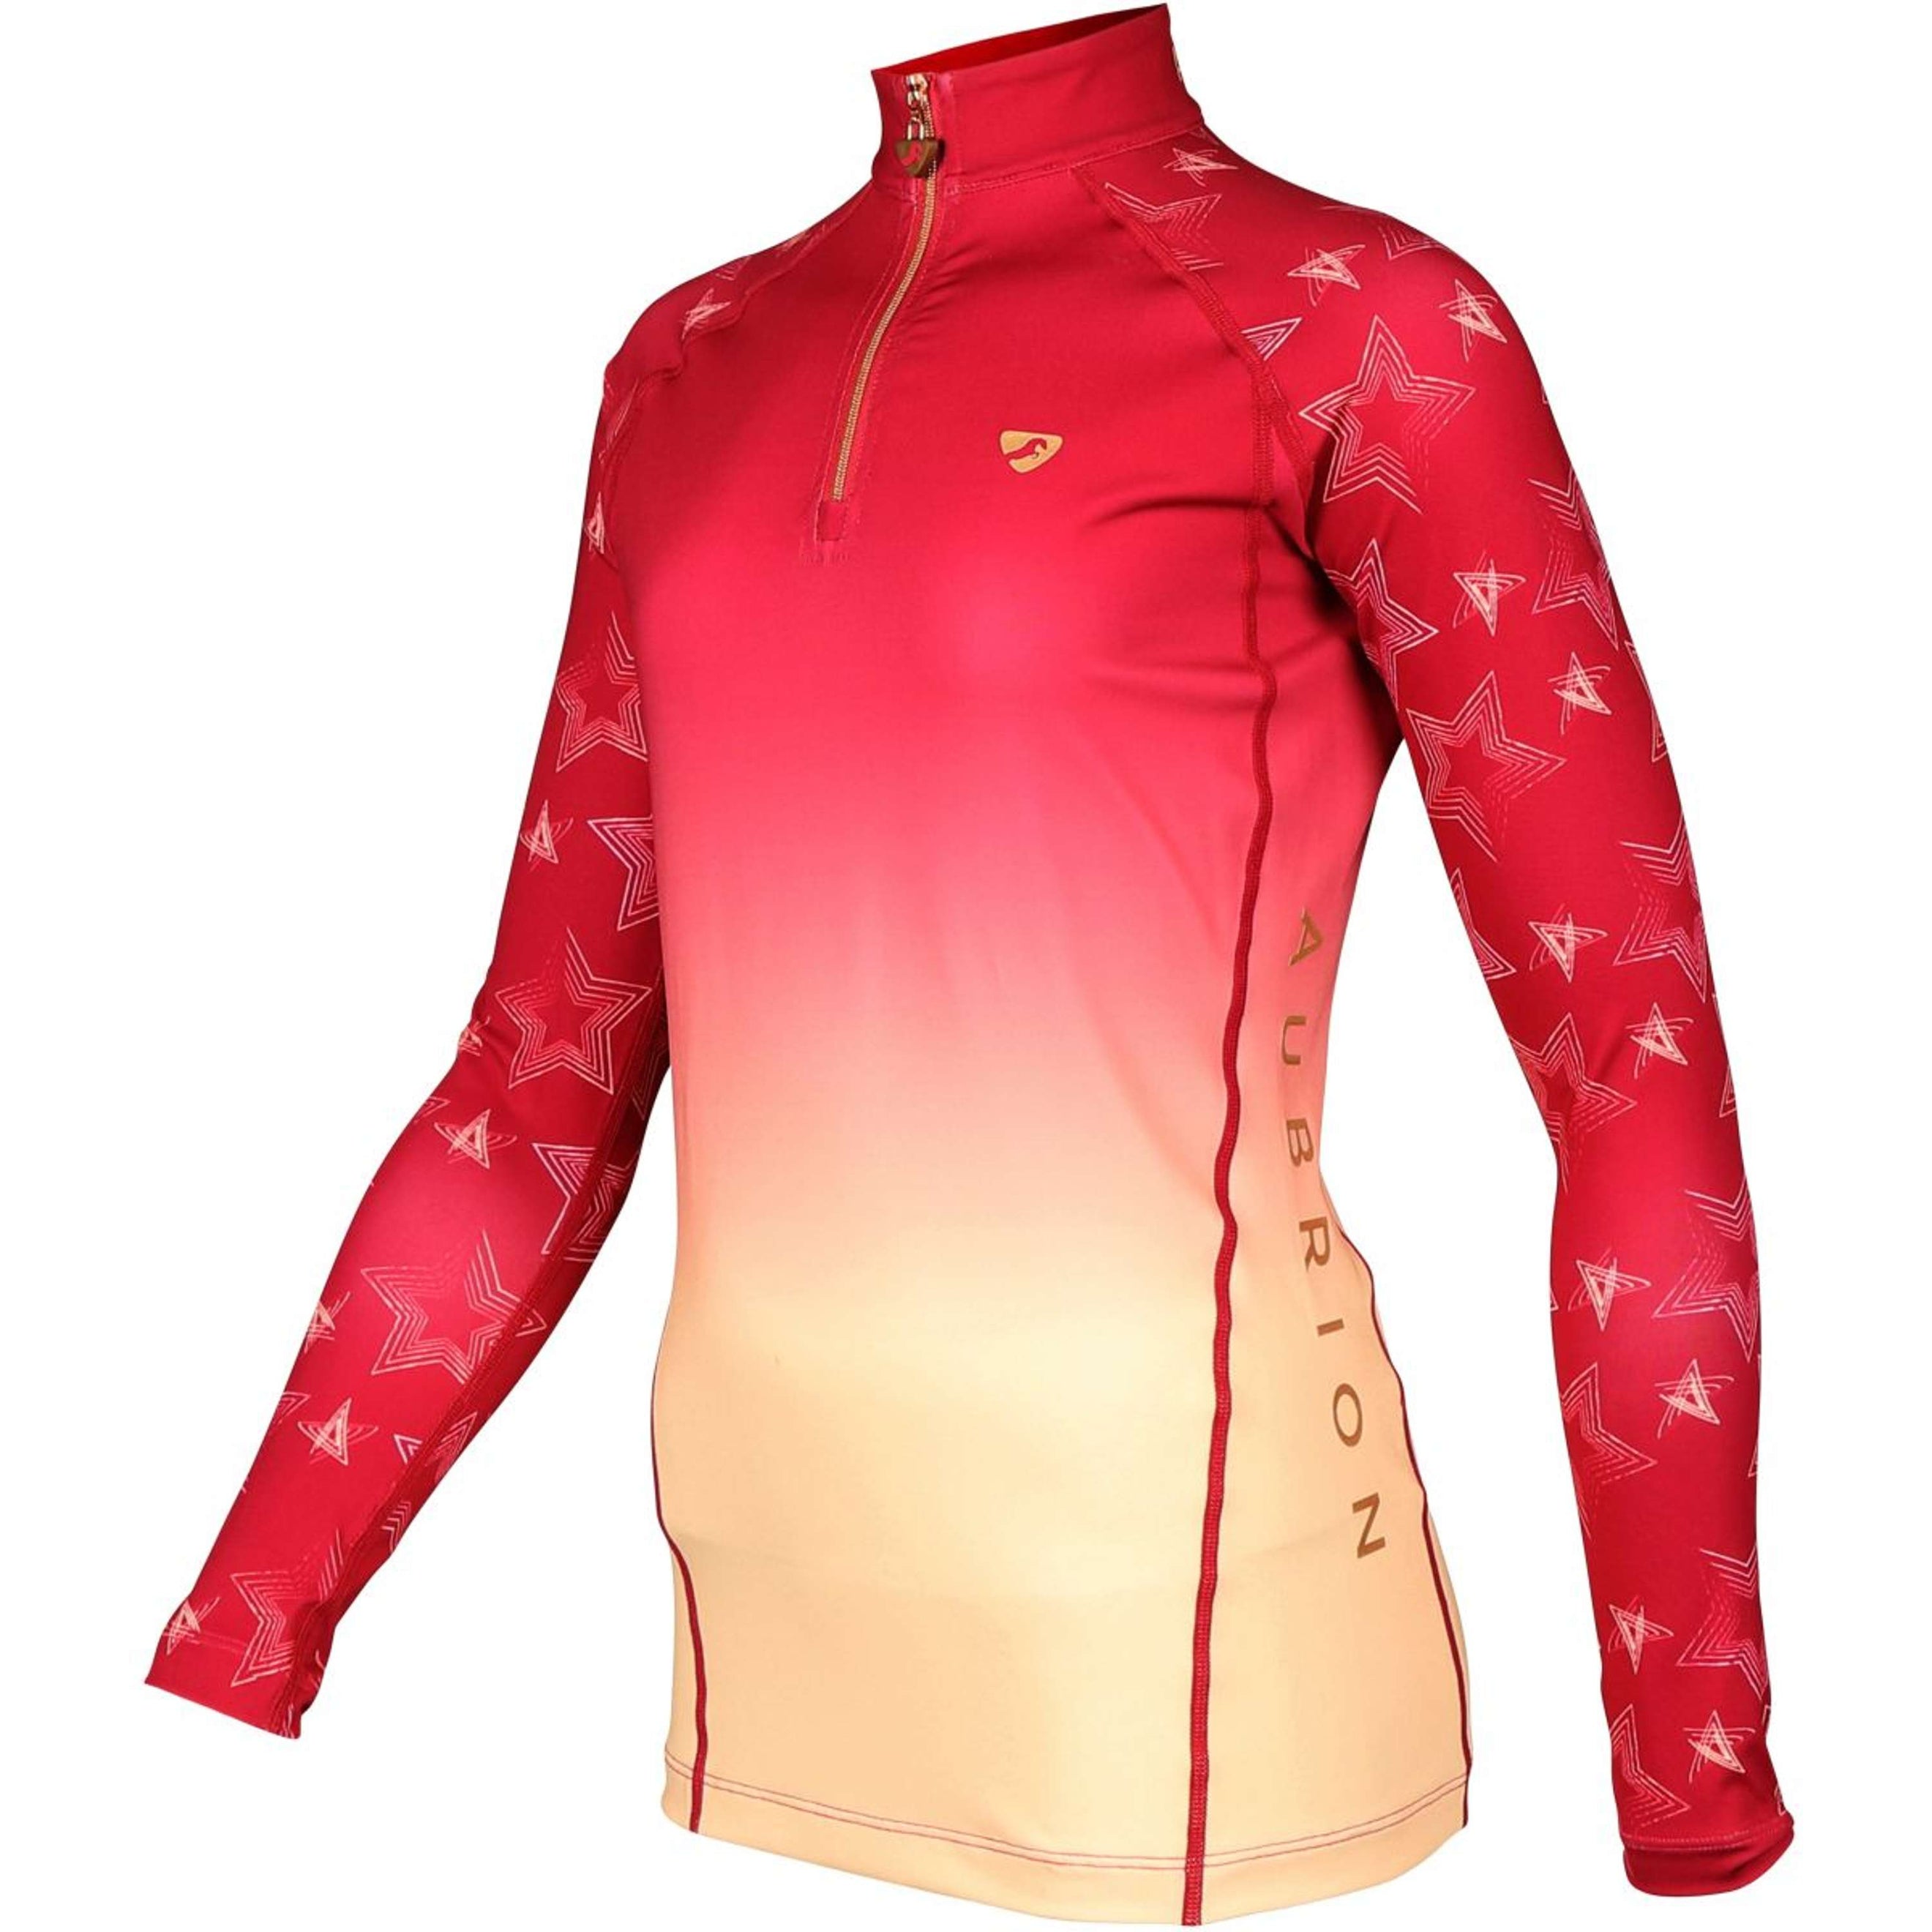 Aubrion Base Layer Hyde Park Young Rider Star